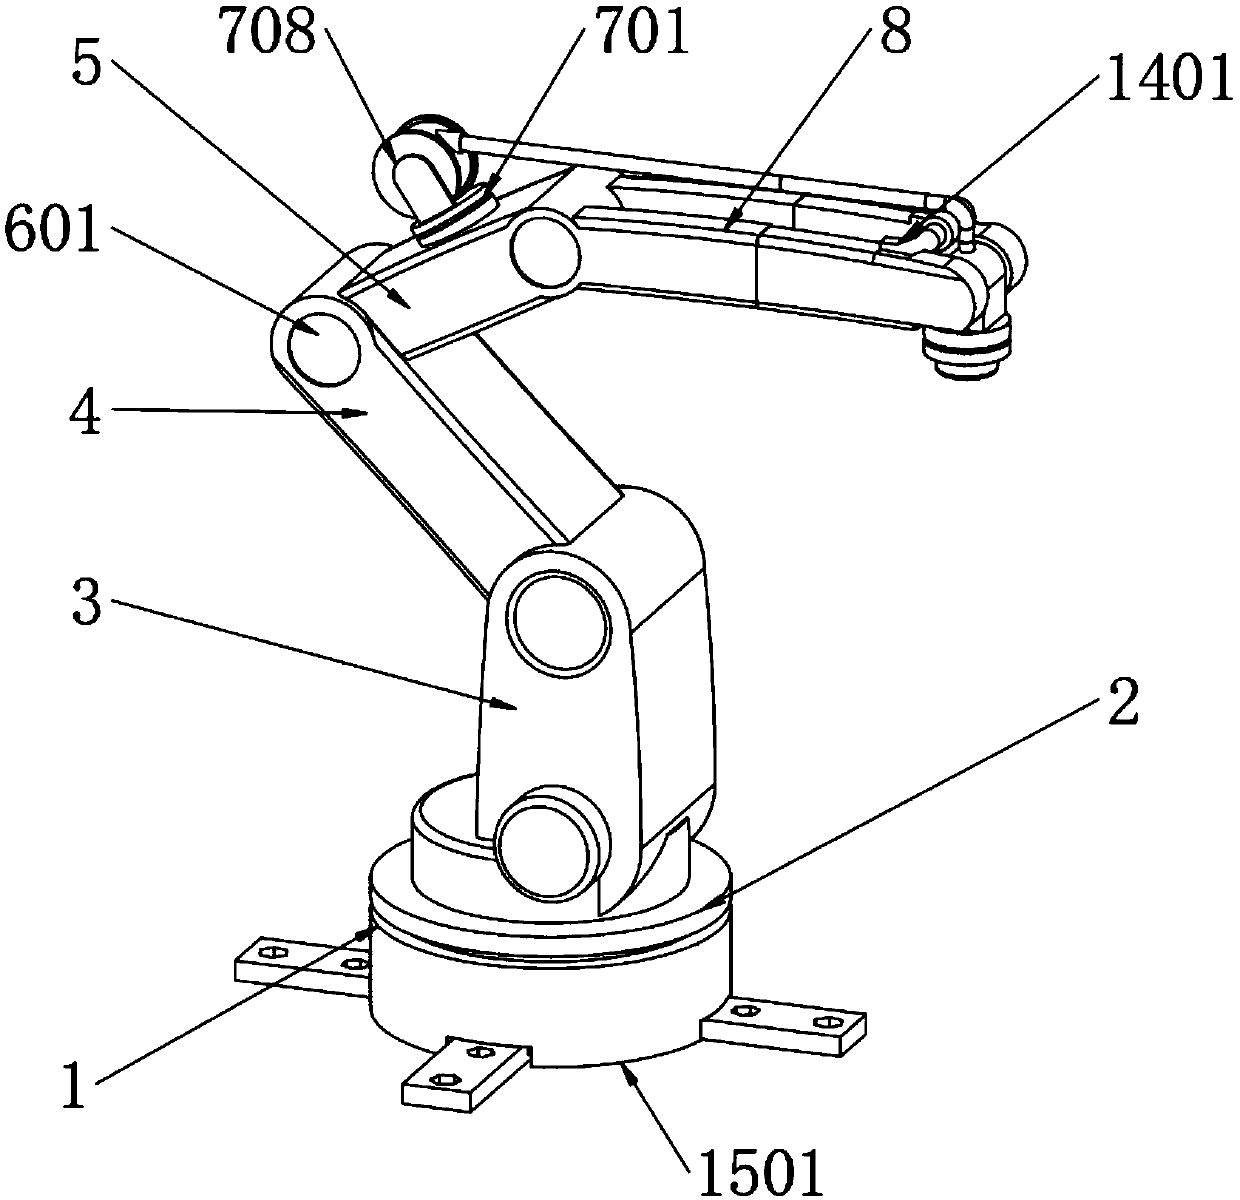 Improved mechanical arm device